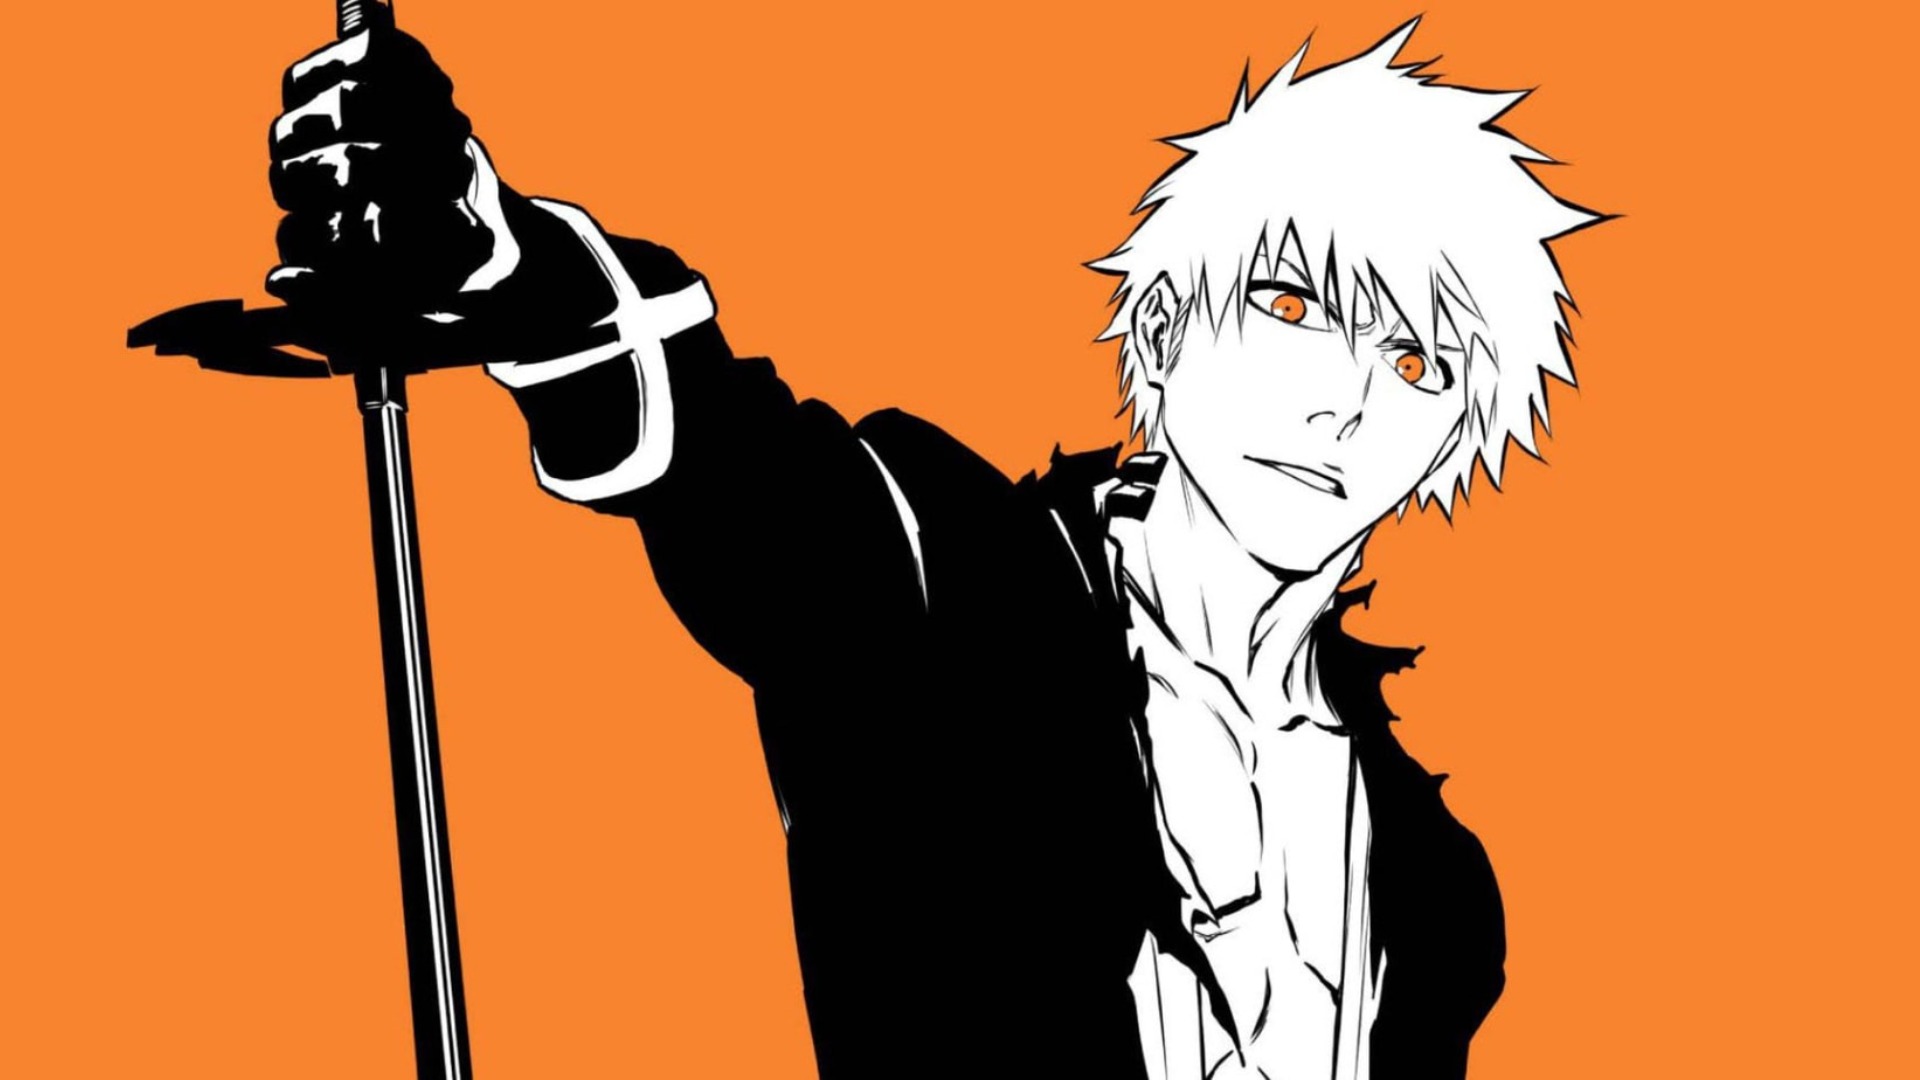 Crunchyroll Trends As Bleach Moves To Disney Plus Without Notice